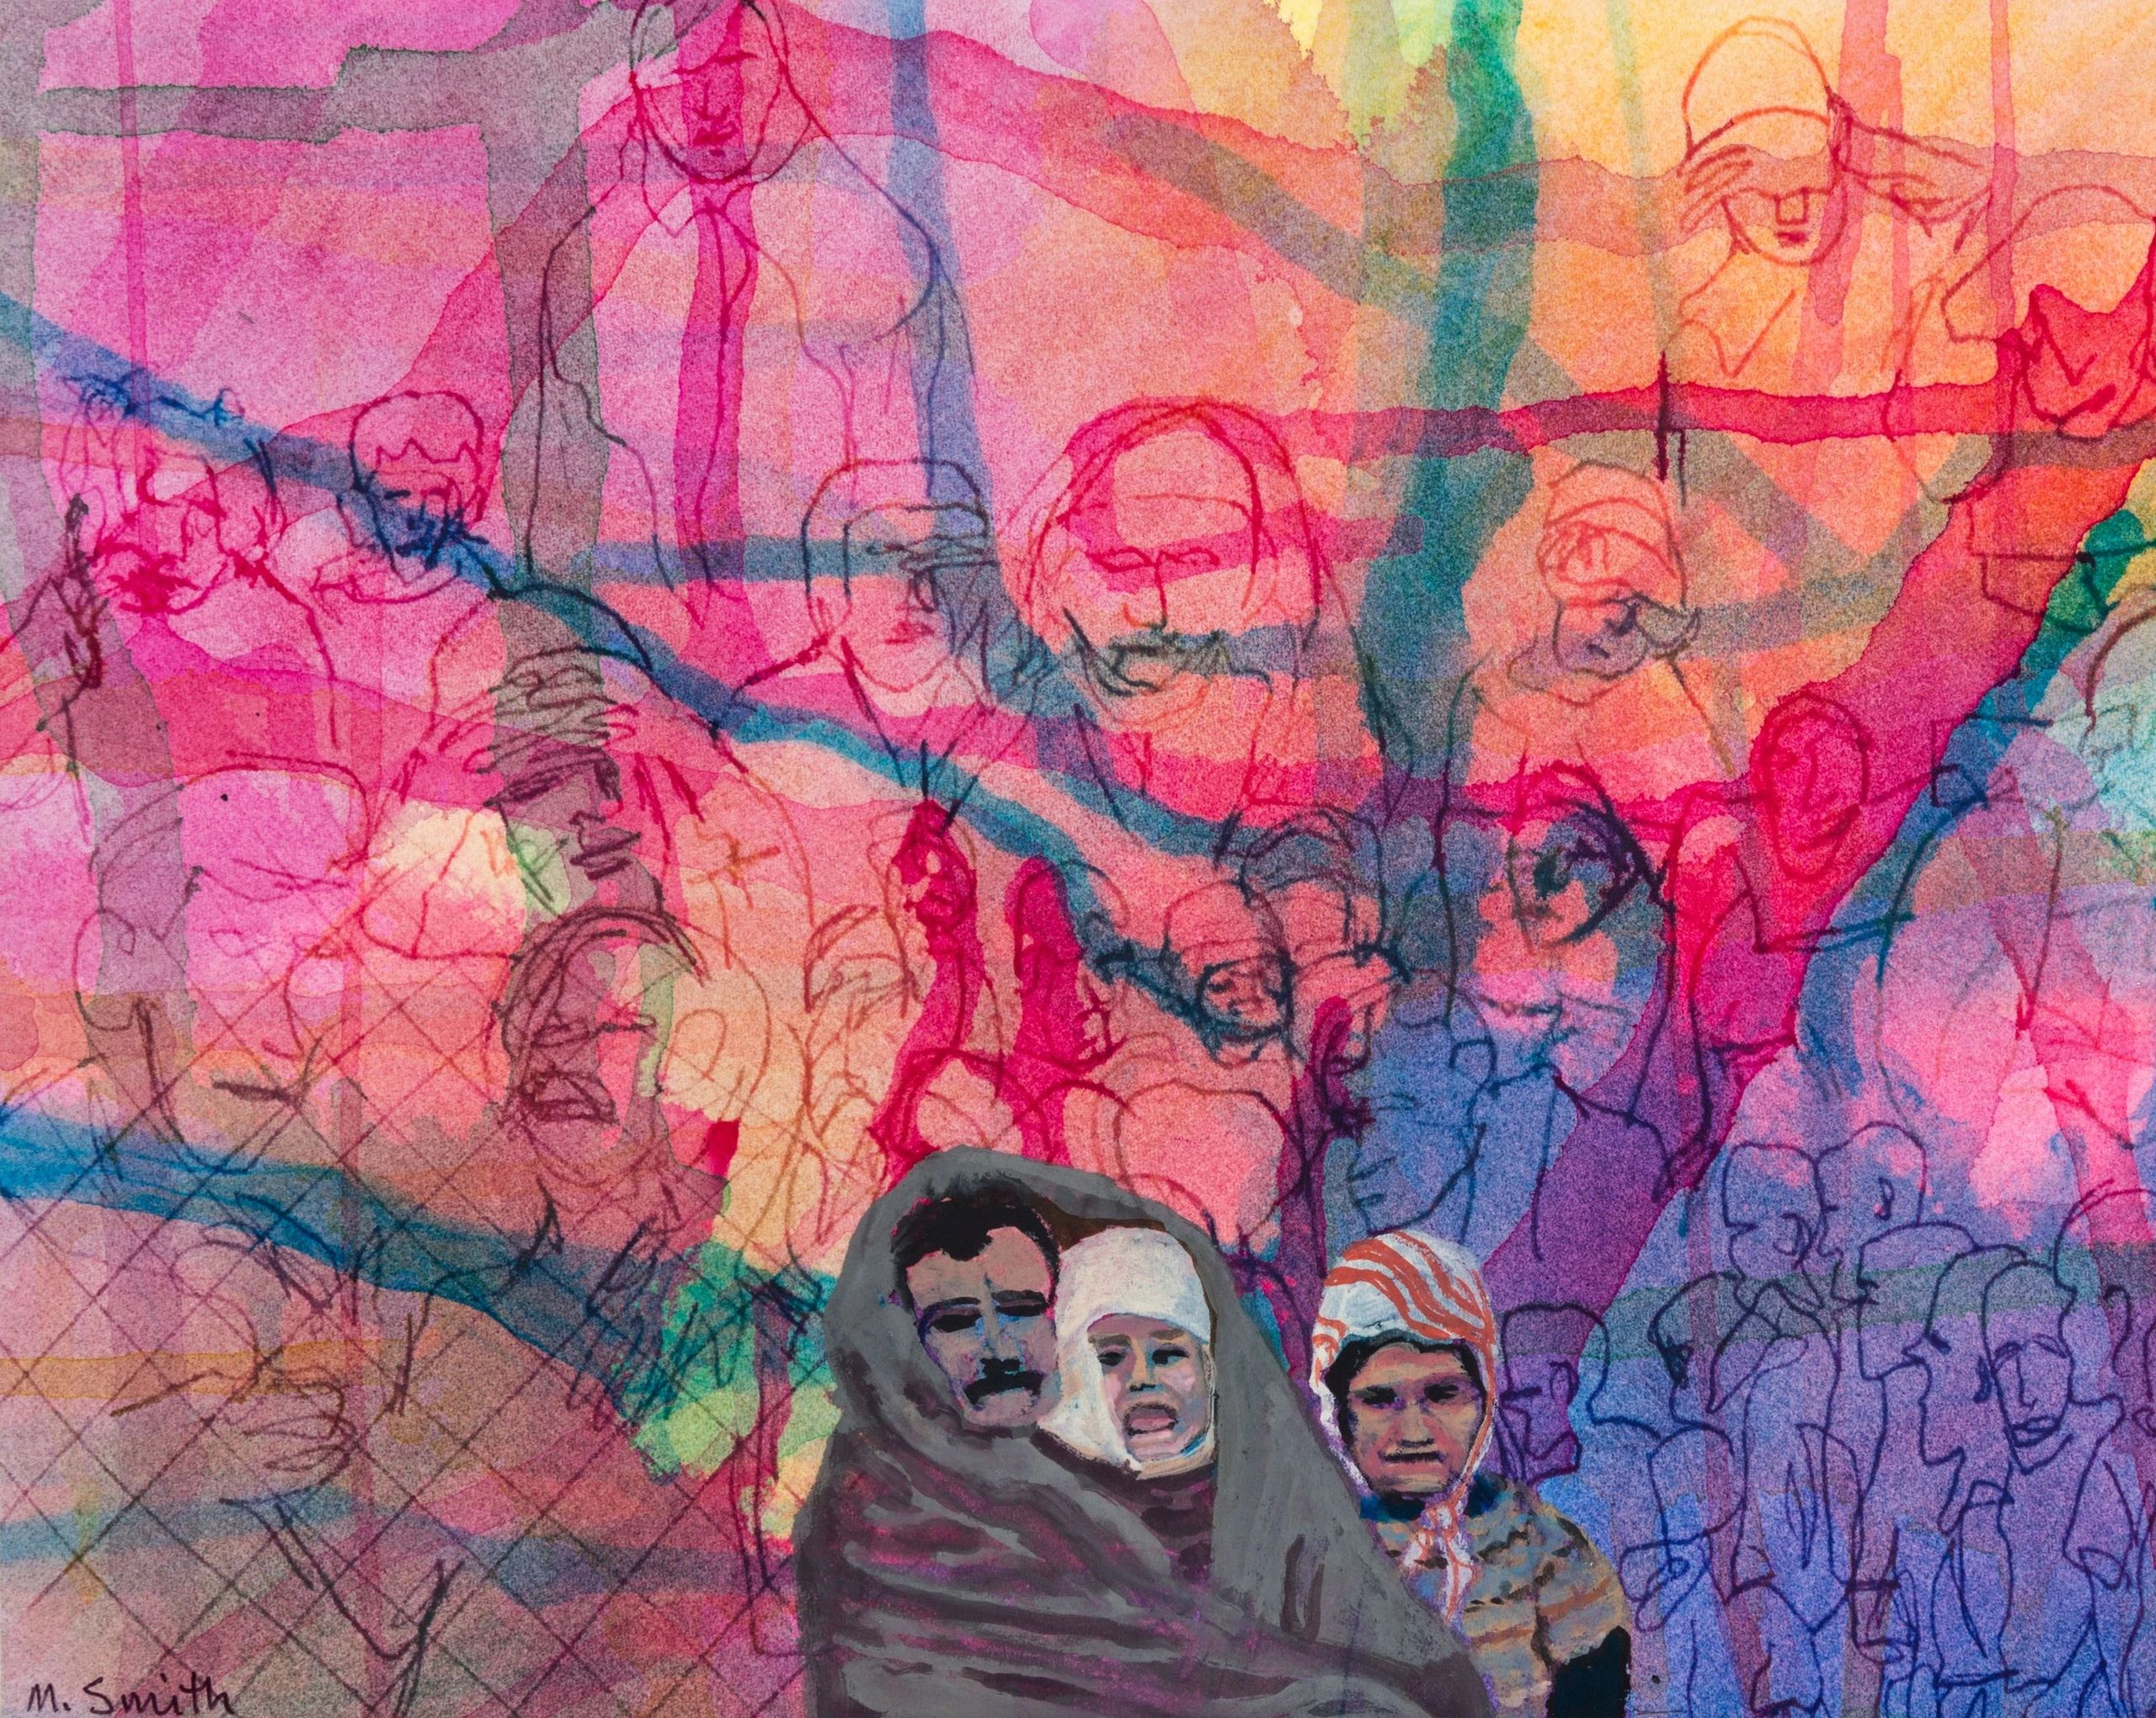 refugees painted onto an abstract background consisting of more refugees
